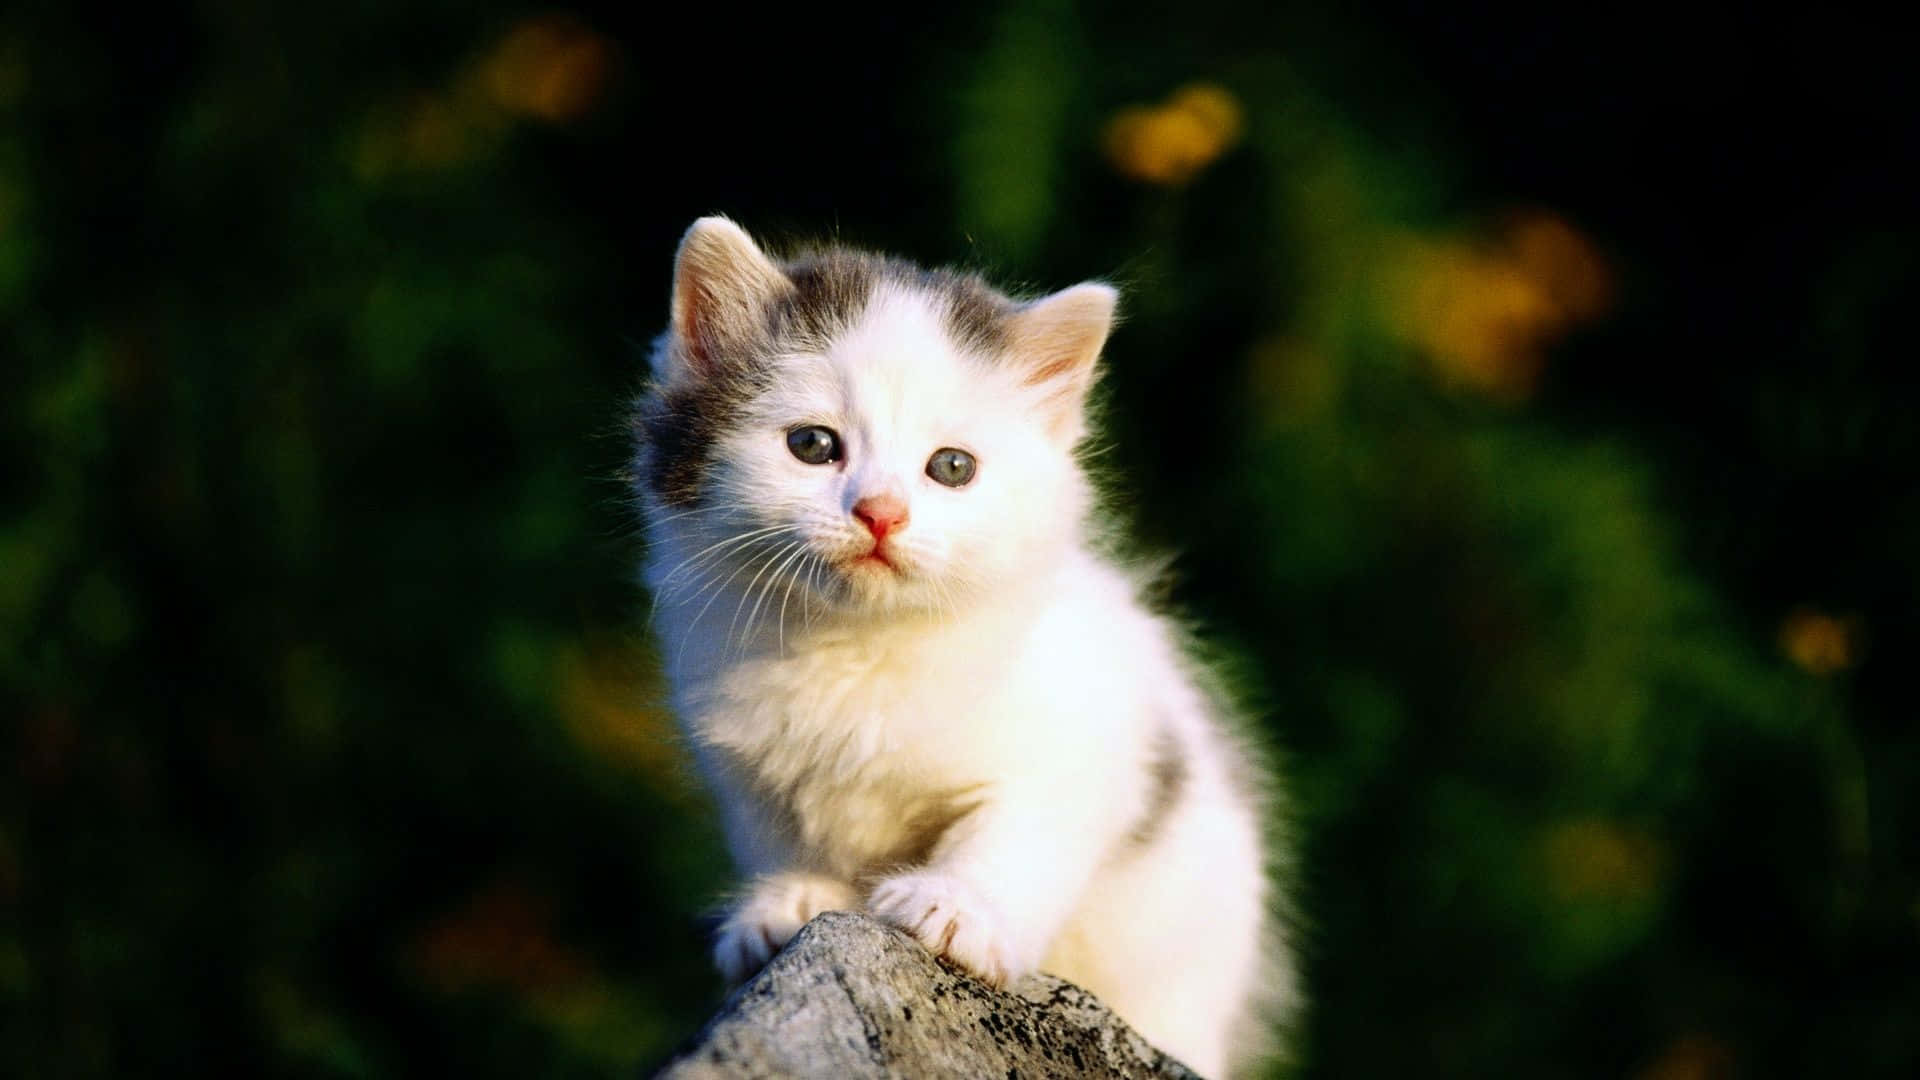 A White Kitten Is Sitting On Top Of A Rock